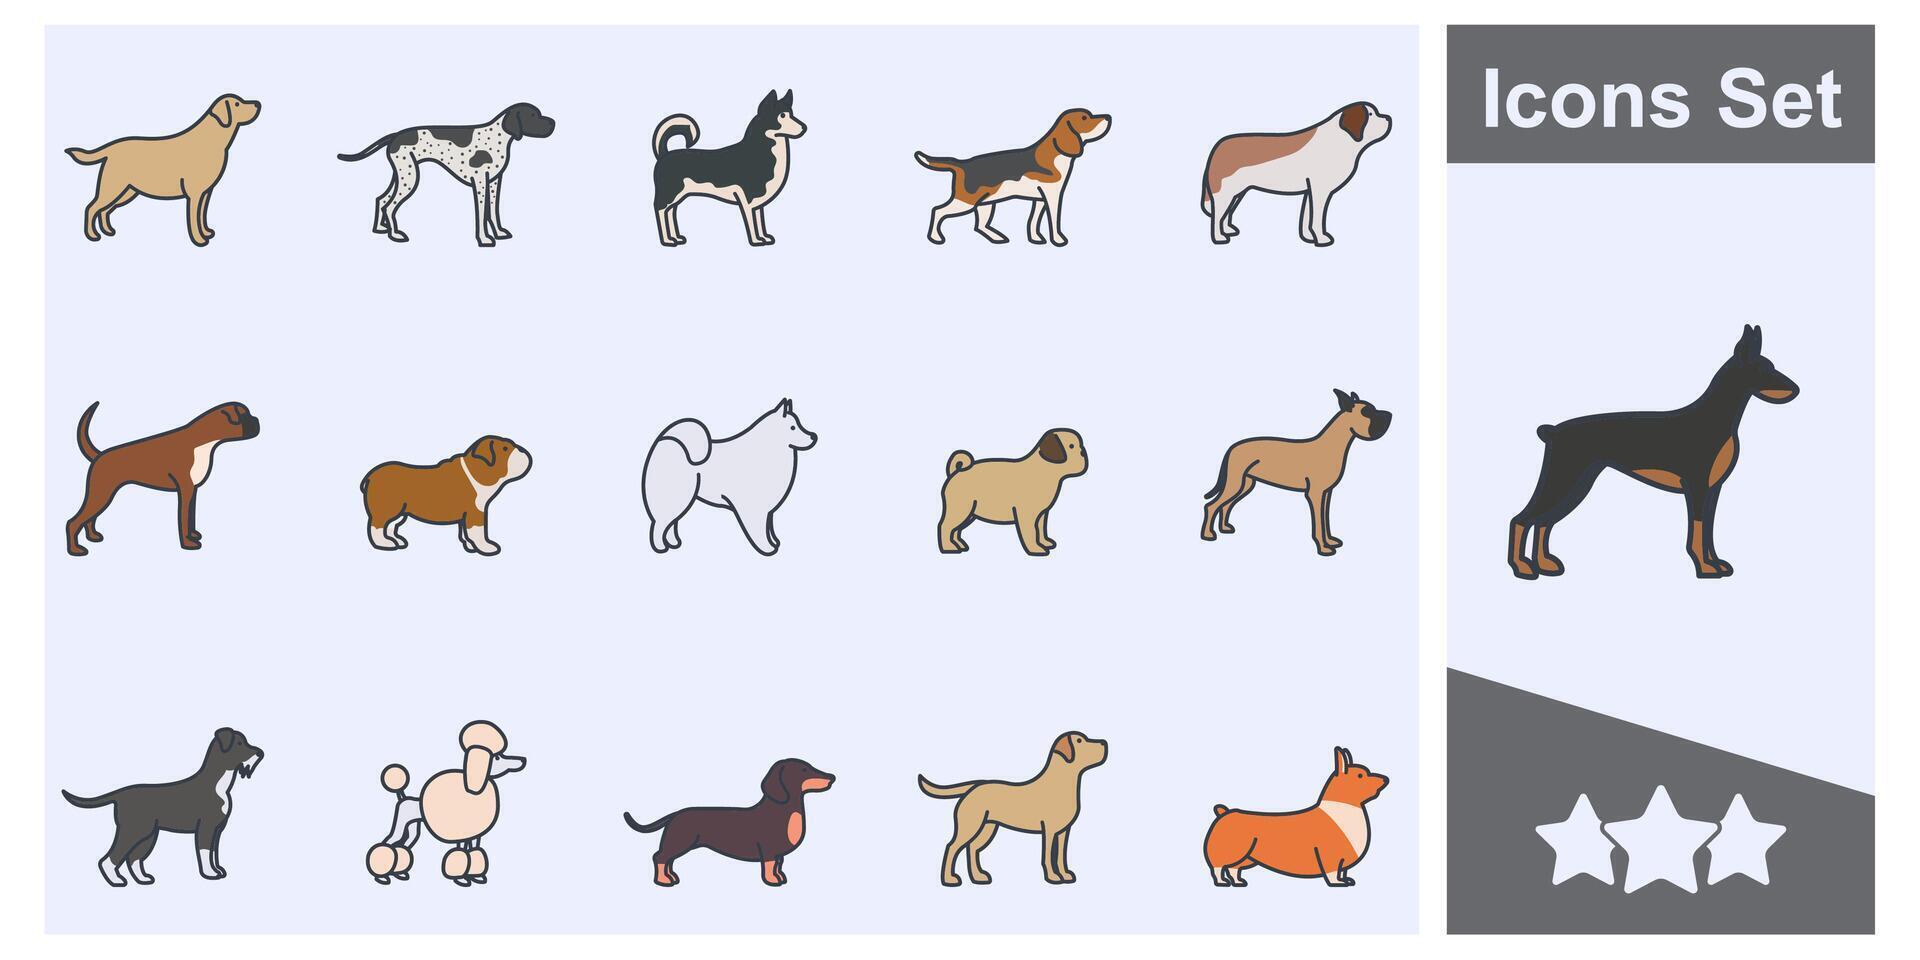 dogs icon set symbol collection, logo isolated illustration vector